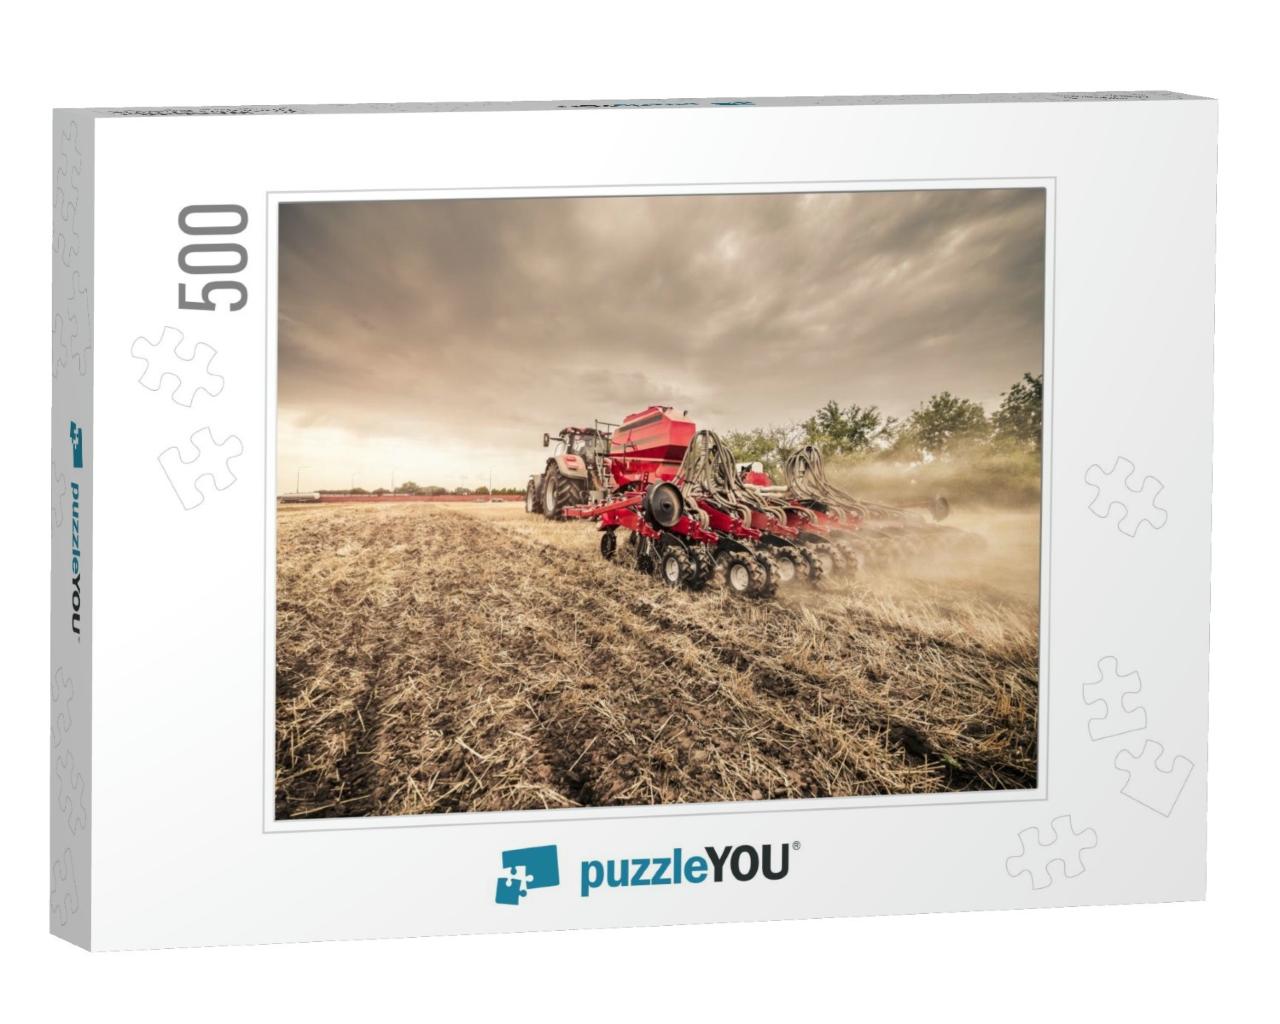 Modern Red Tractor with Red Implement Seeding Directly In... Jigsaw Puzzle with 500 pieces